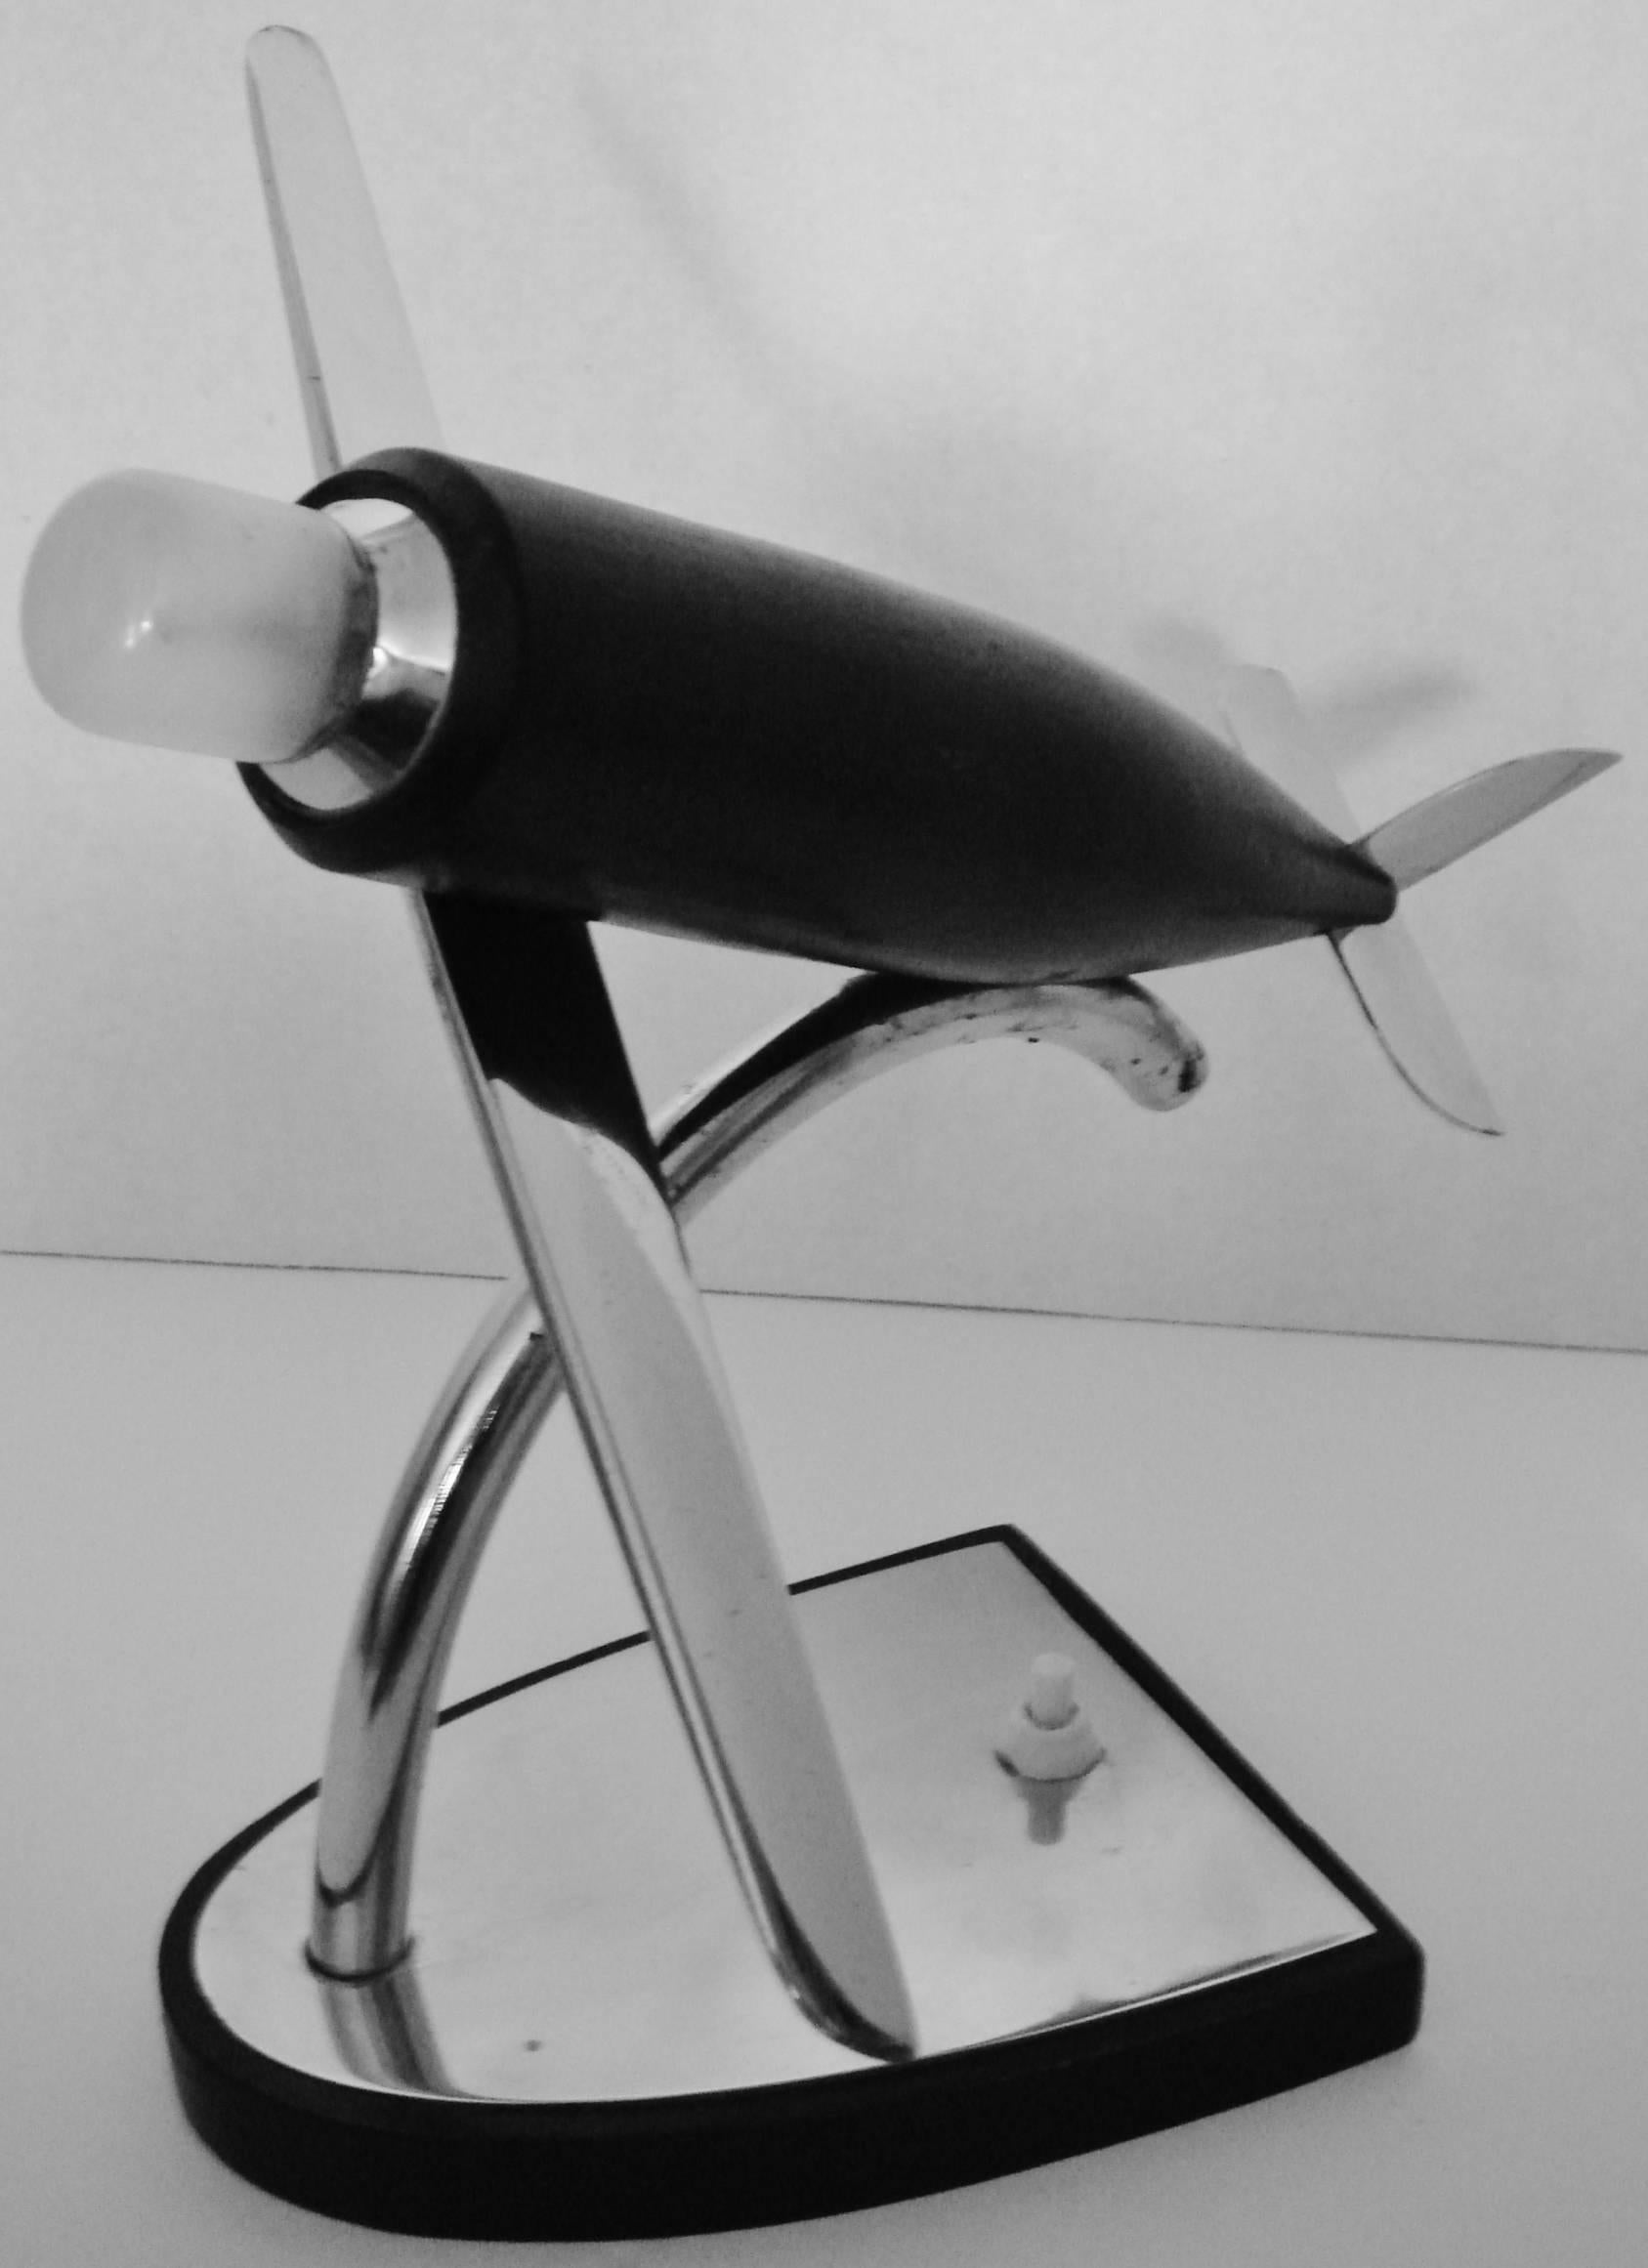 Mid-20th Century German Art Deco Chrome, Ebonized Wood and Bakelite Stylized Airplane Accent Lamp For Sale